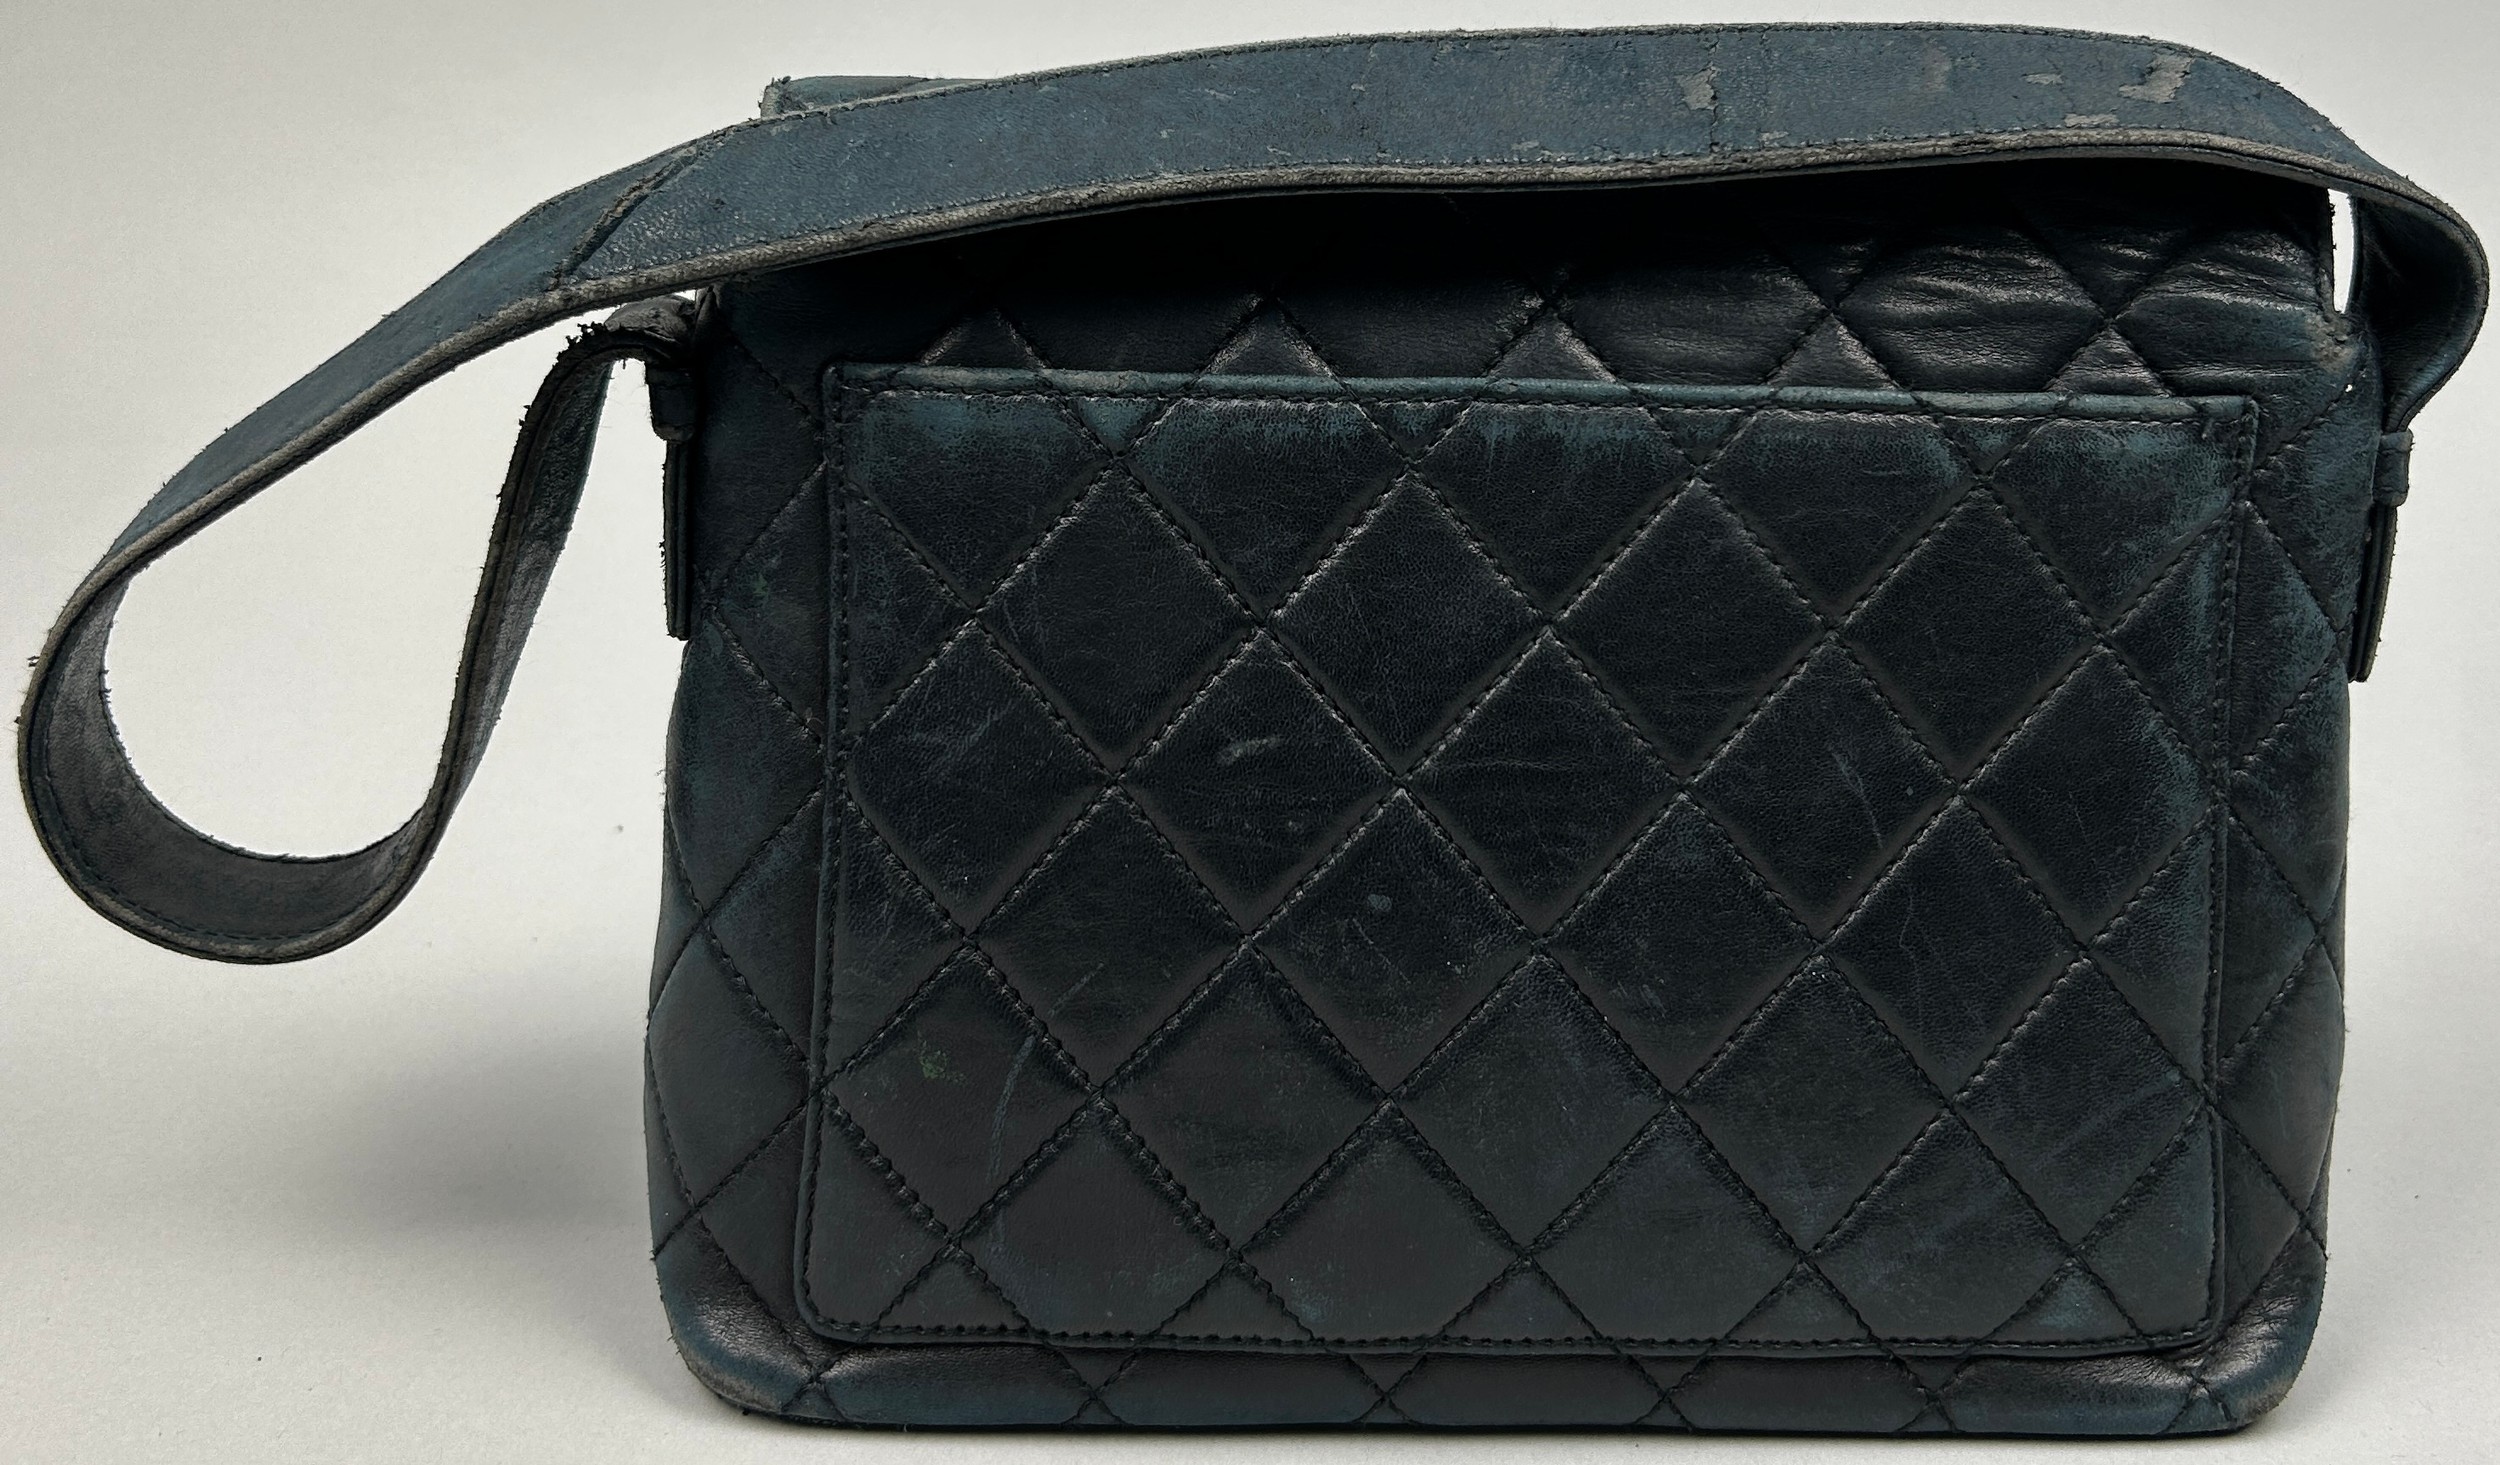 A CHANEL NAVY BLUE LEATHER QUILTED HANDBAG, with certificate of authenticity serial 10218184 and - Image 4 of 4